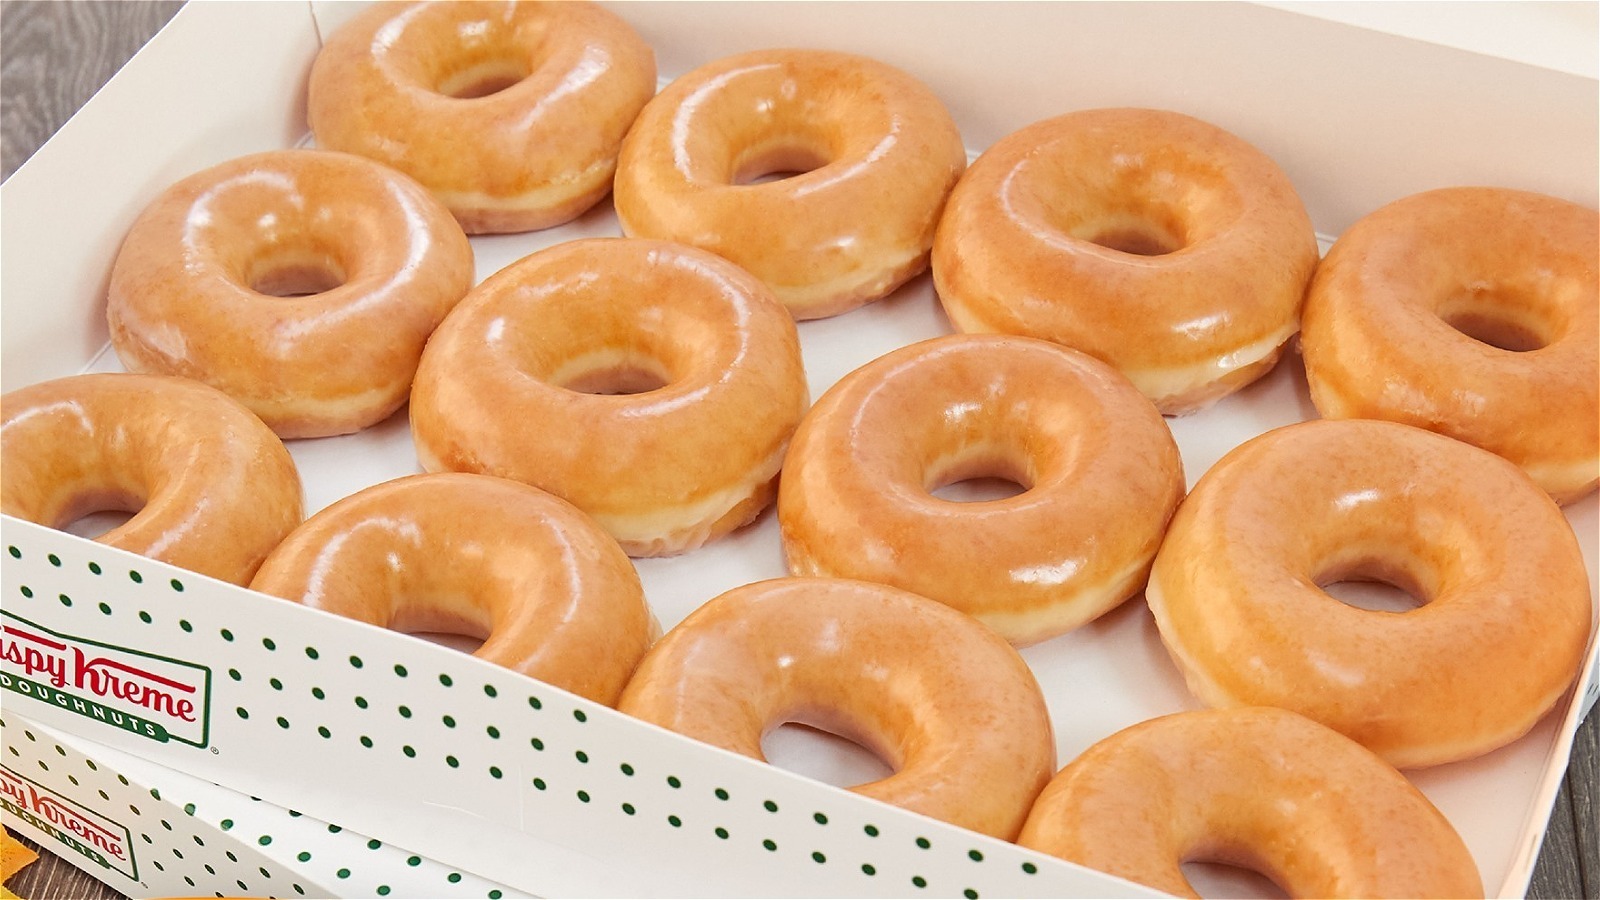 Krispy Kreme Is Giving Away Free Donuts On Election Day